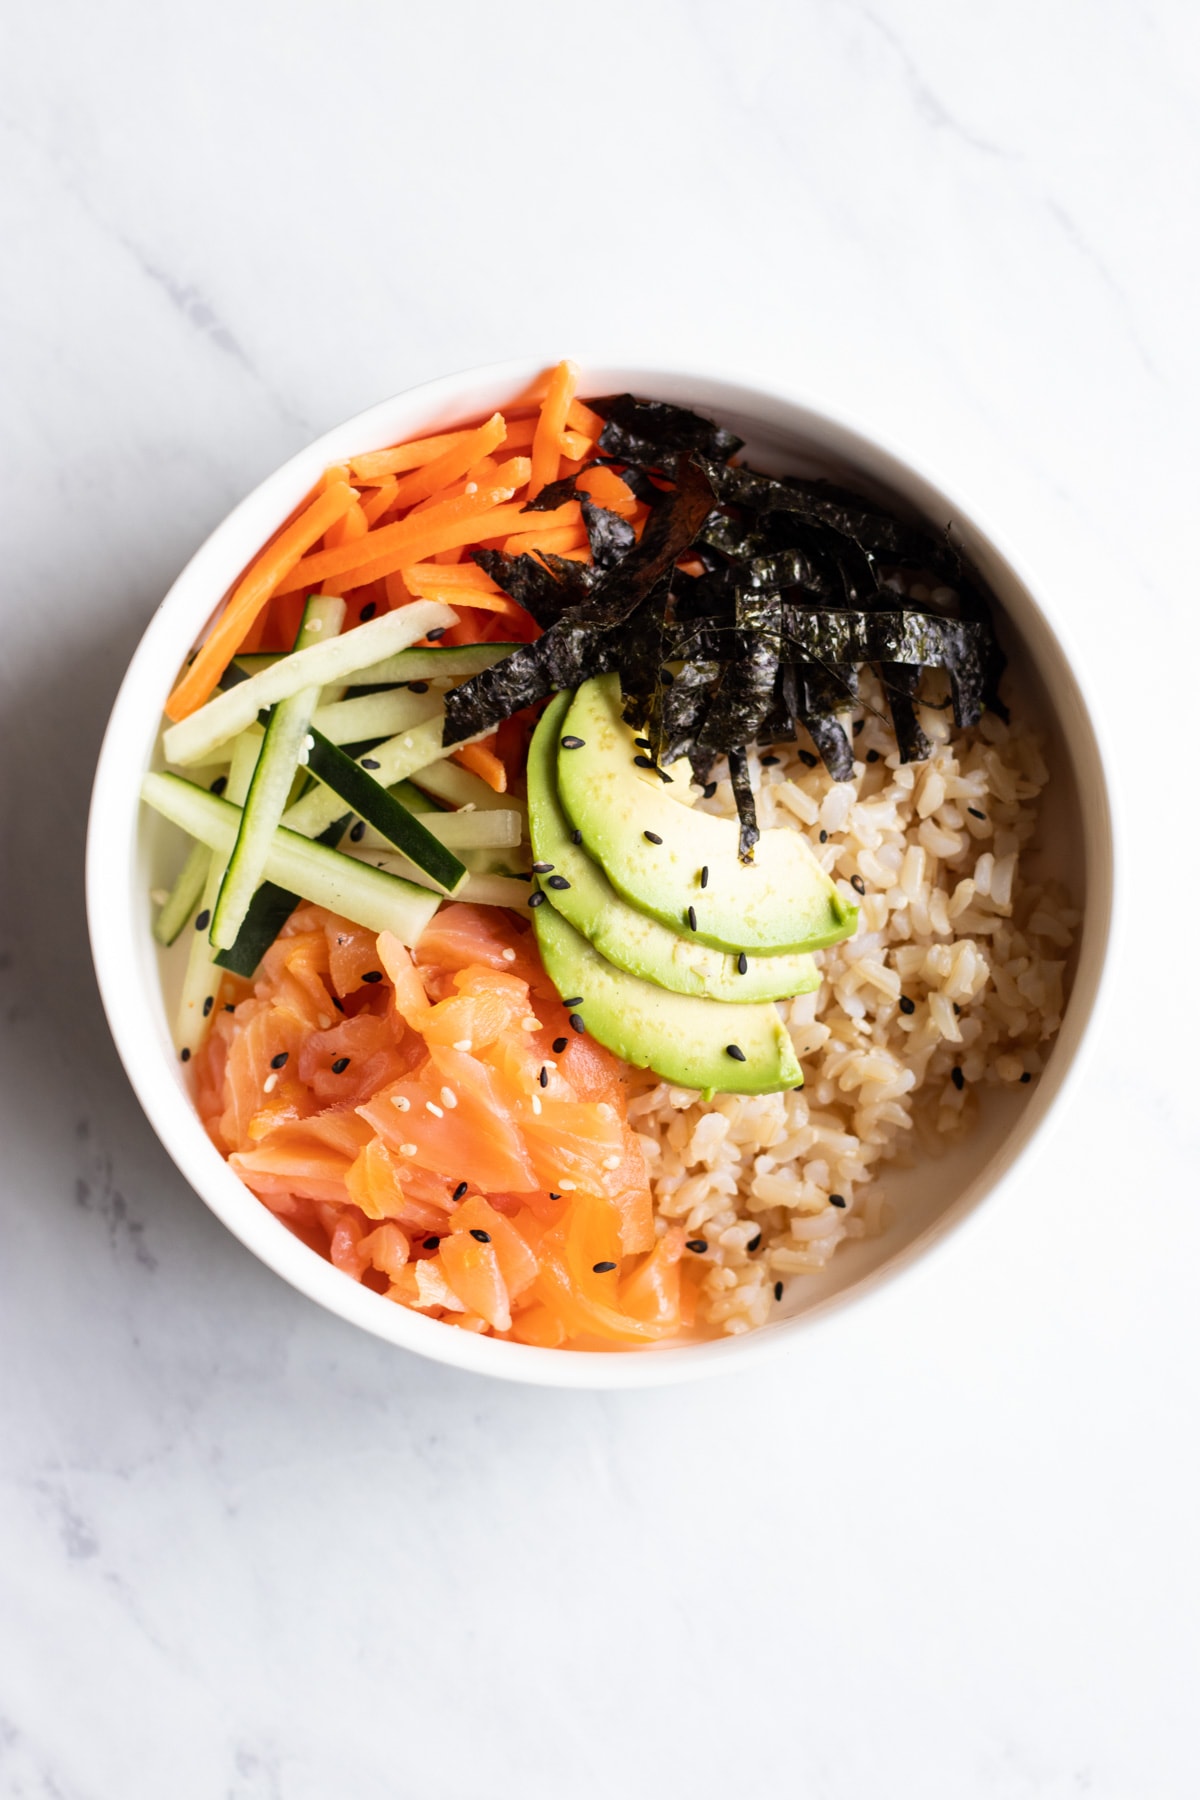 A single white bowl filled with a base of brown rice, small handfuls of smoked salmon, cucumber matchsticks, carrot matchsticks, and nori (seaweed) strips are arranged on the left side of the bowl. Several avocado slices are in the center and there's a sprinkle of sesame seeds.